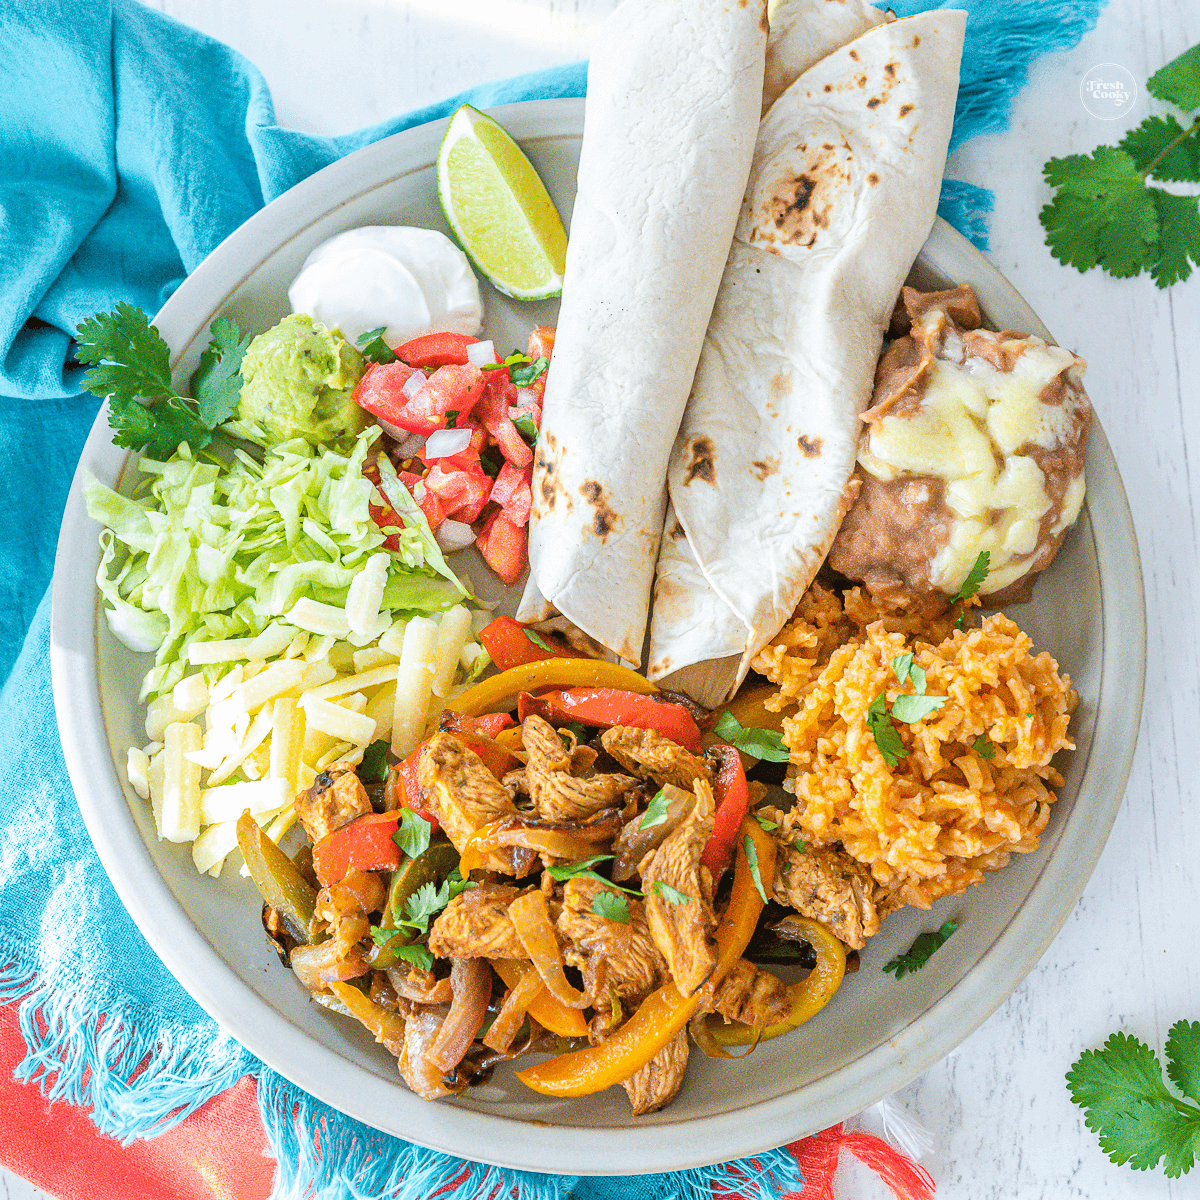 Authentic Mexican chicken fajitas on plate with tortillas, Spanish rice, beans and condiments.